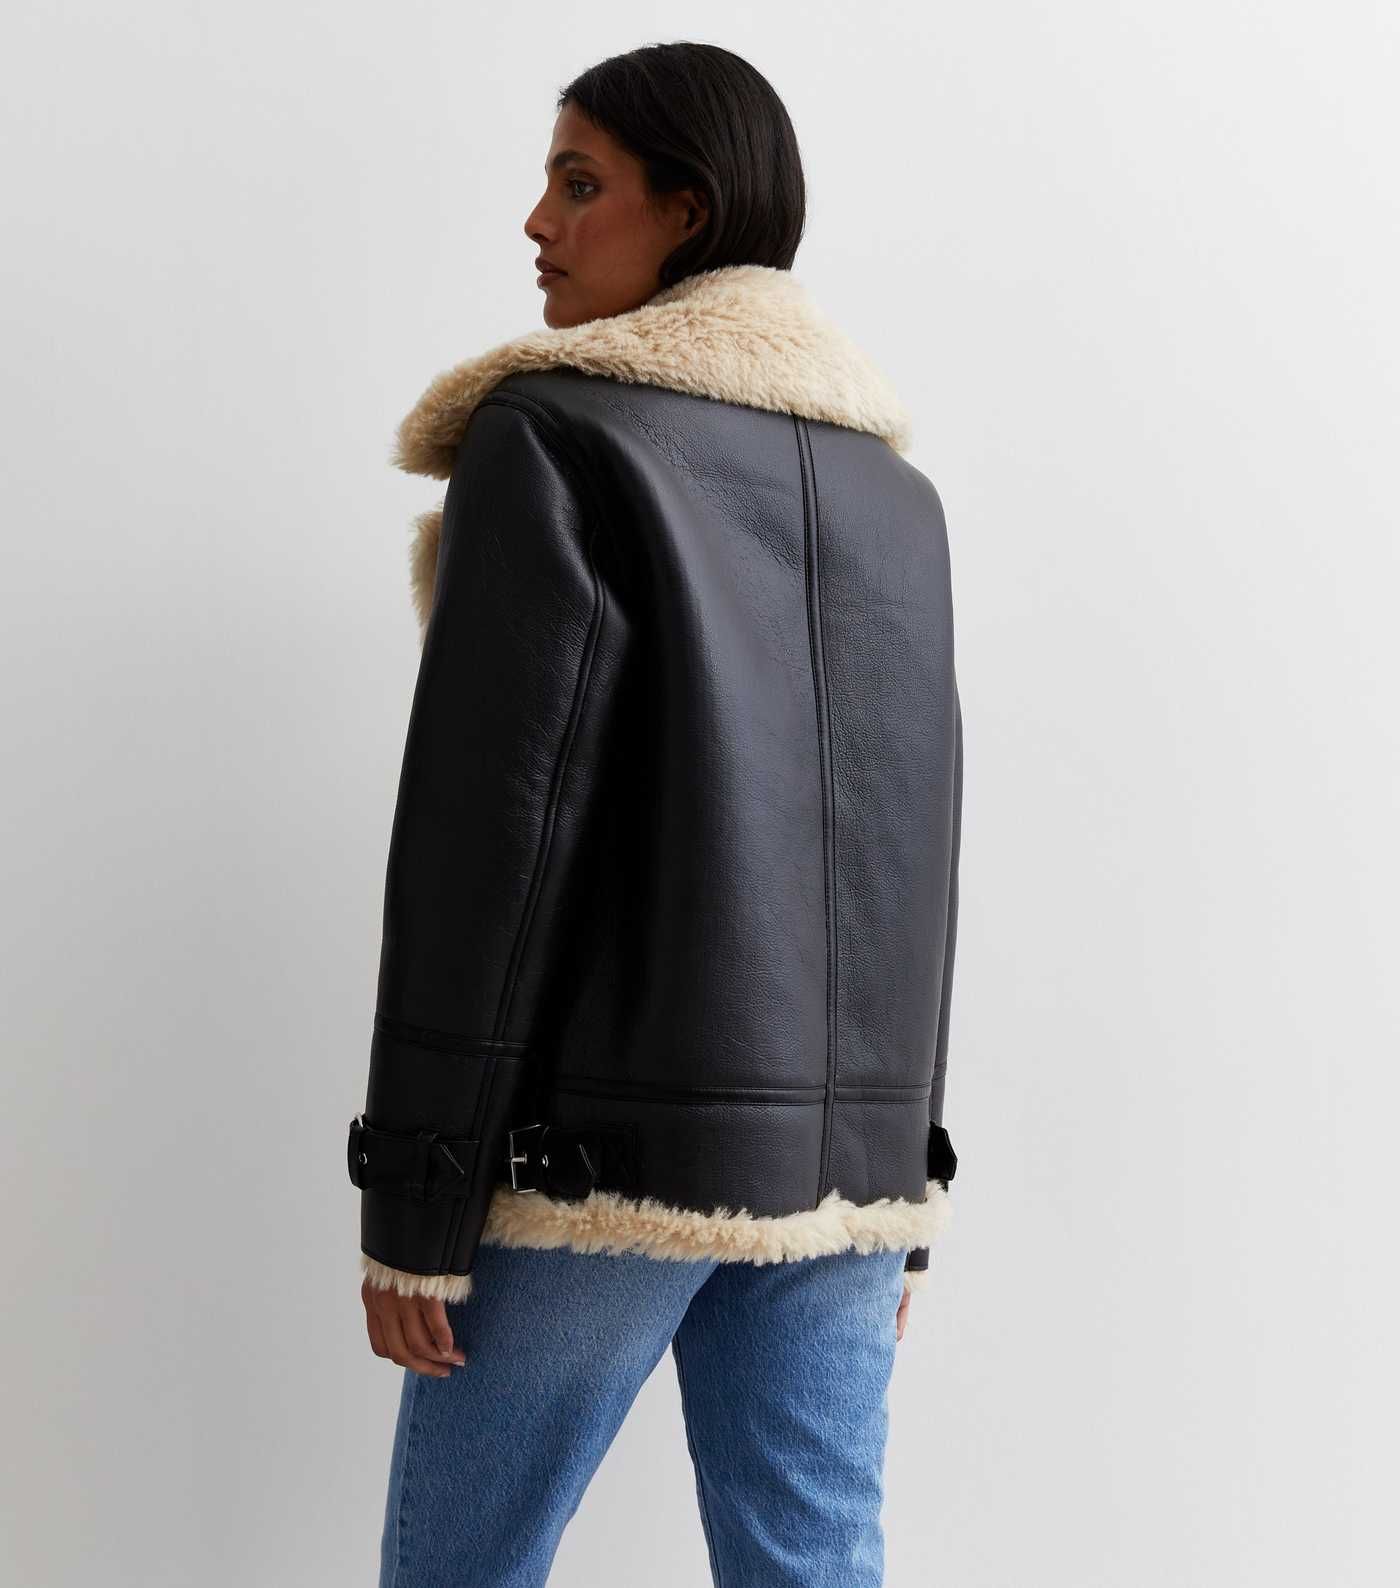 Black Leather-Look Faux Fur Trim Aviator Jacket
						
						Add to Saved Items
						Remove from... | New Look (UK)